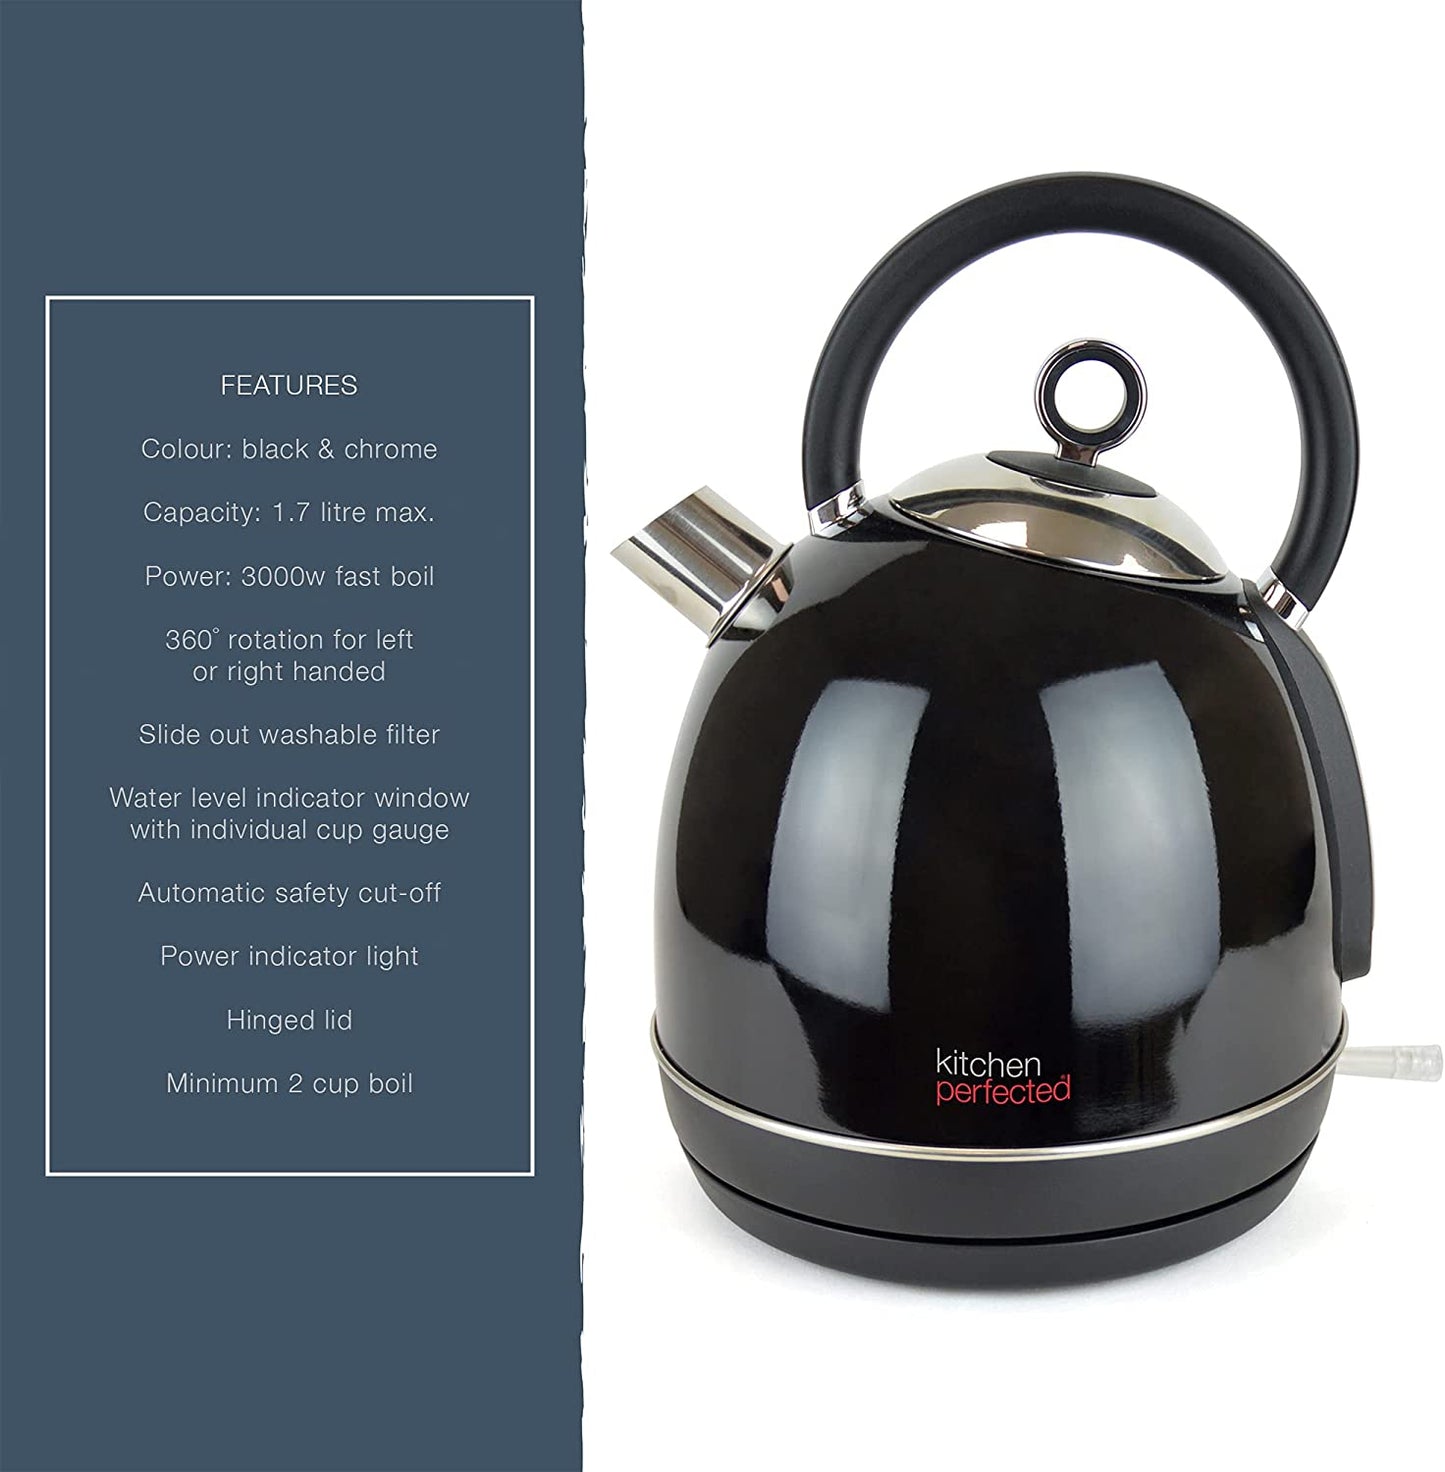 Stainless Steel Electric Black Kettle Kitchen Perfected (E1625RG)